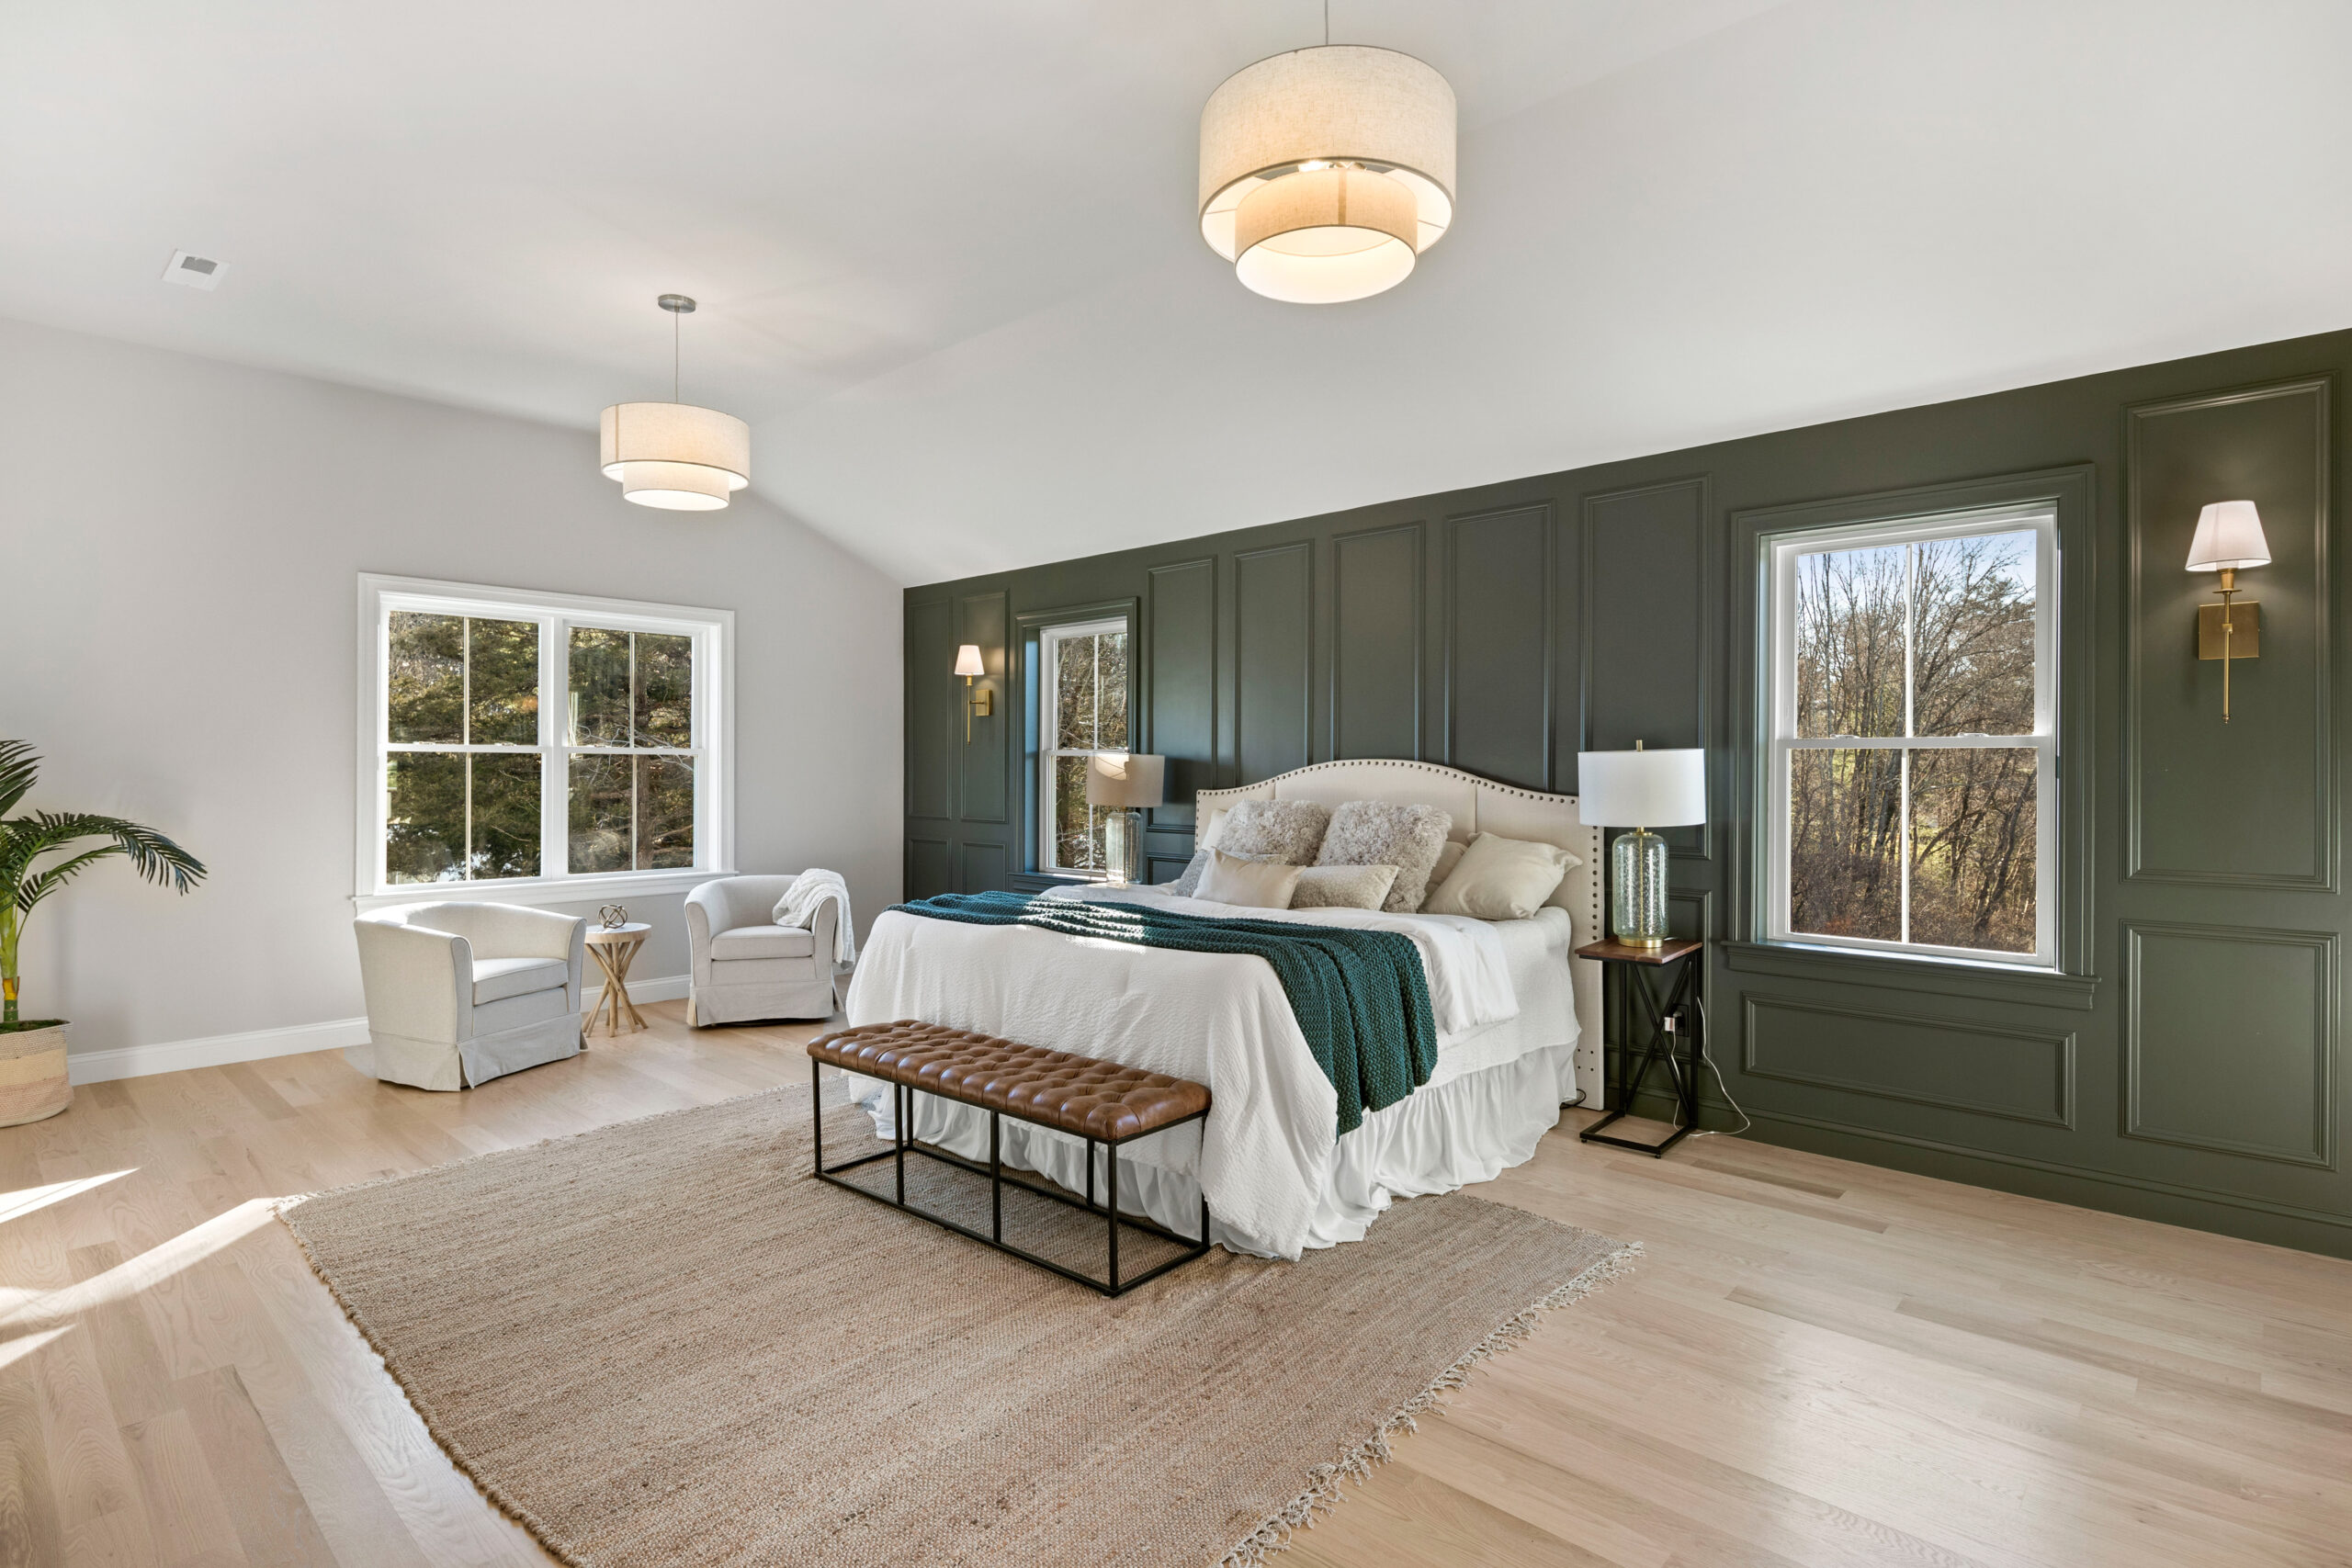 A spacious and serene bedroom with a wall of dark green wainscoting providing a dramatic backdrop to an elegant white bed adorned with plush pillows and a green throw. Two large windows allow natural light to stream in, highlighting the light hardwood floors and a large area rug. A tufted leather bench sits at the foot of the bed, and a cozy reading nook is created with two armchairs and a small side table near the window. The room features two stylish drum pendant lights, and on the far side, a thriving potted plant adds a touch of nature to the interior. This bedroom exudes a relaxed, luxurious atmosphere. Ashwood Moss 1484